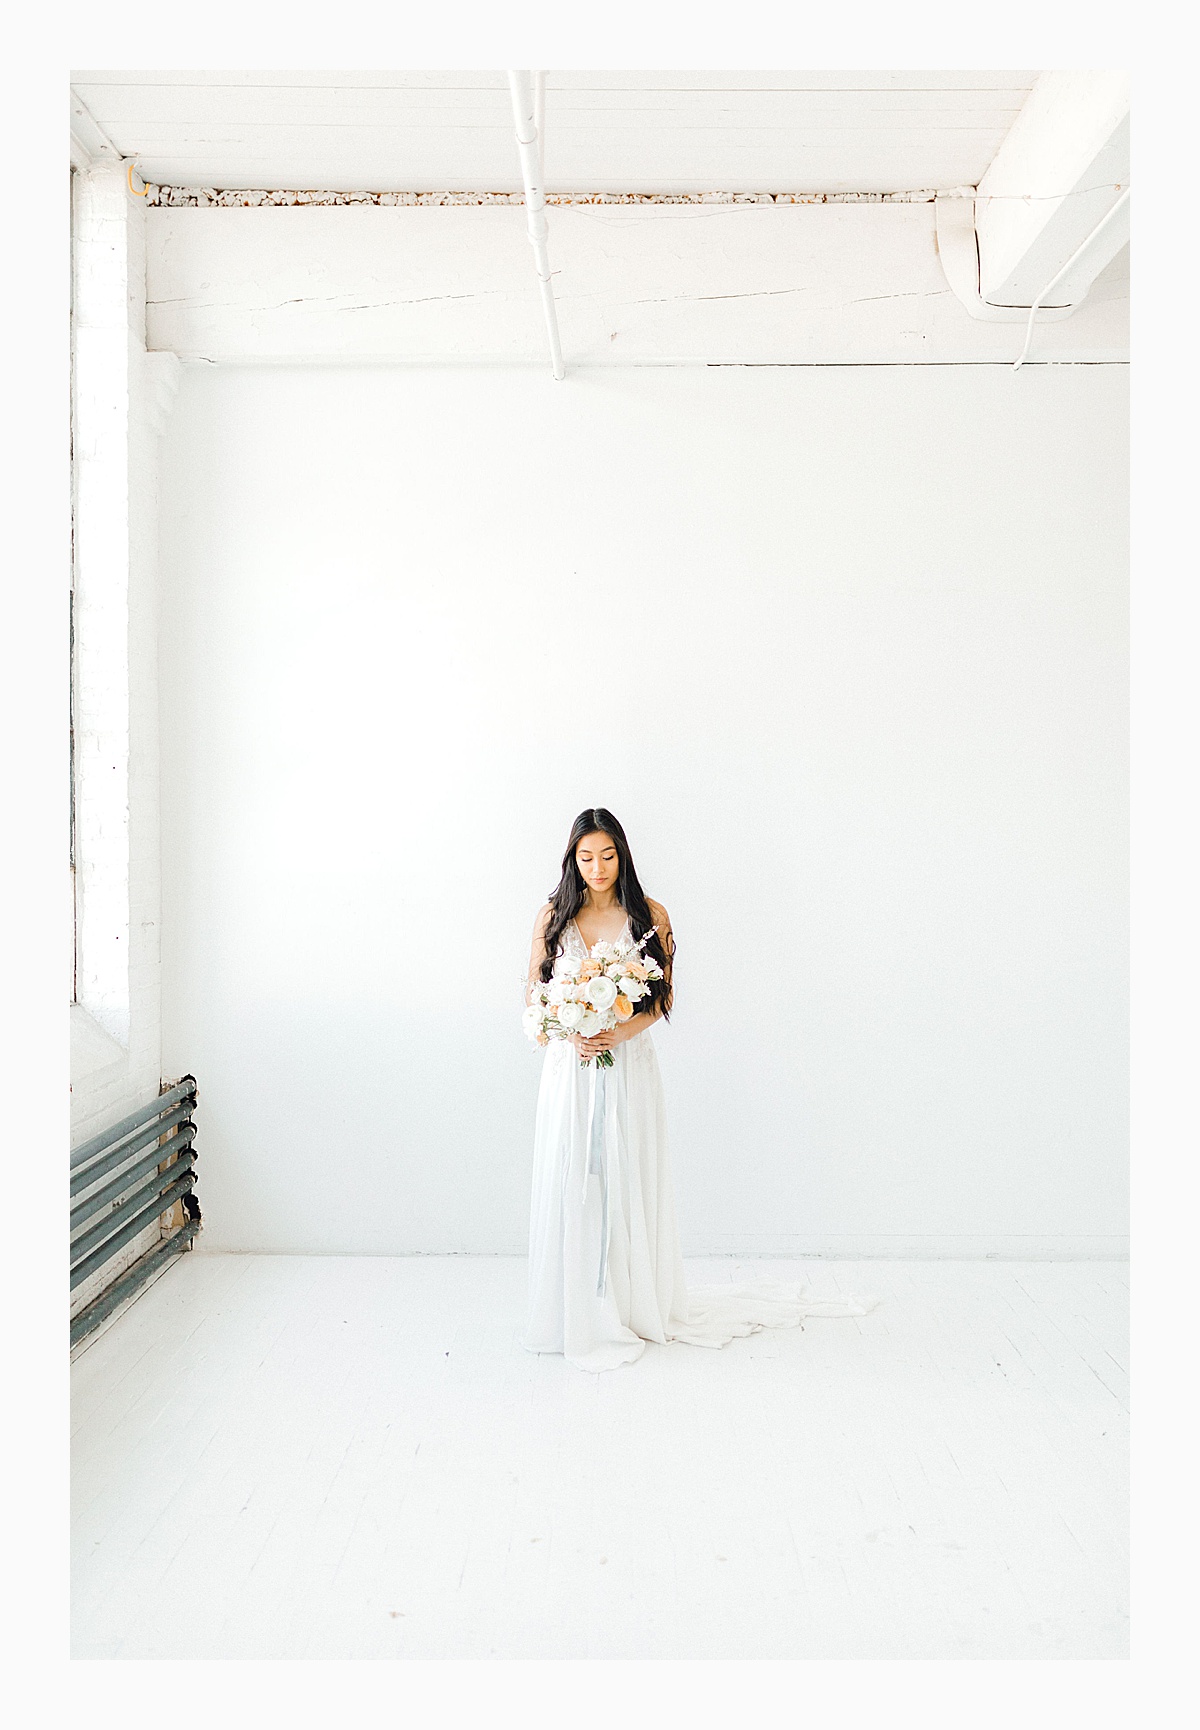 The Bemis Building in downtown Seattle is one of my favorite places to use for photo shoots!  This styled bridal shoot with touches of peach and white was dreamy.  #emmarosecompany #kindredpresets #seattlebride_0015.jpg